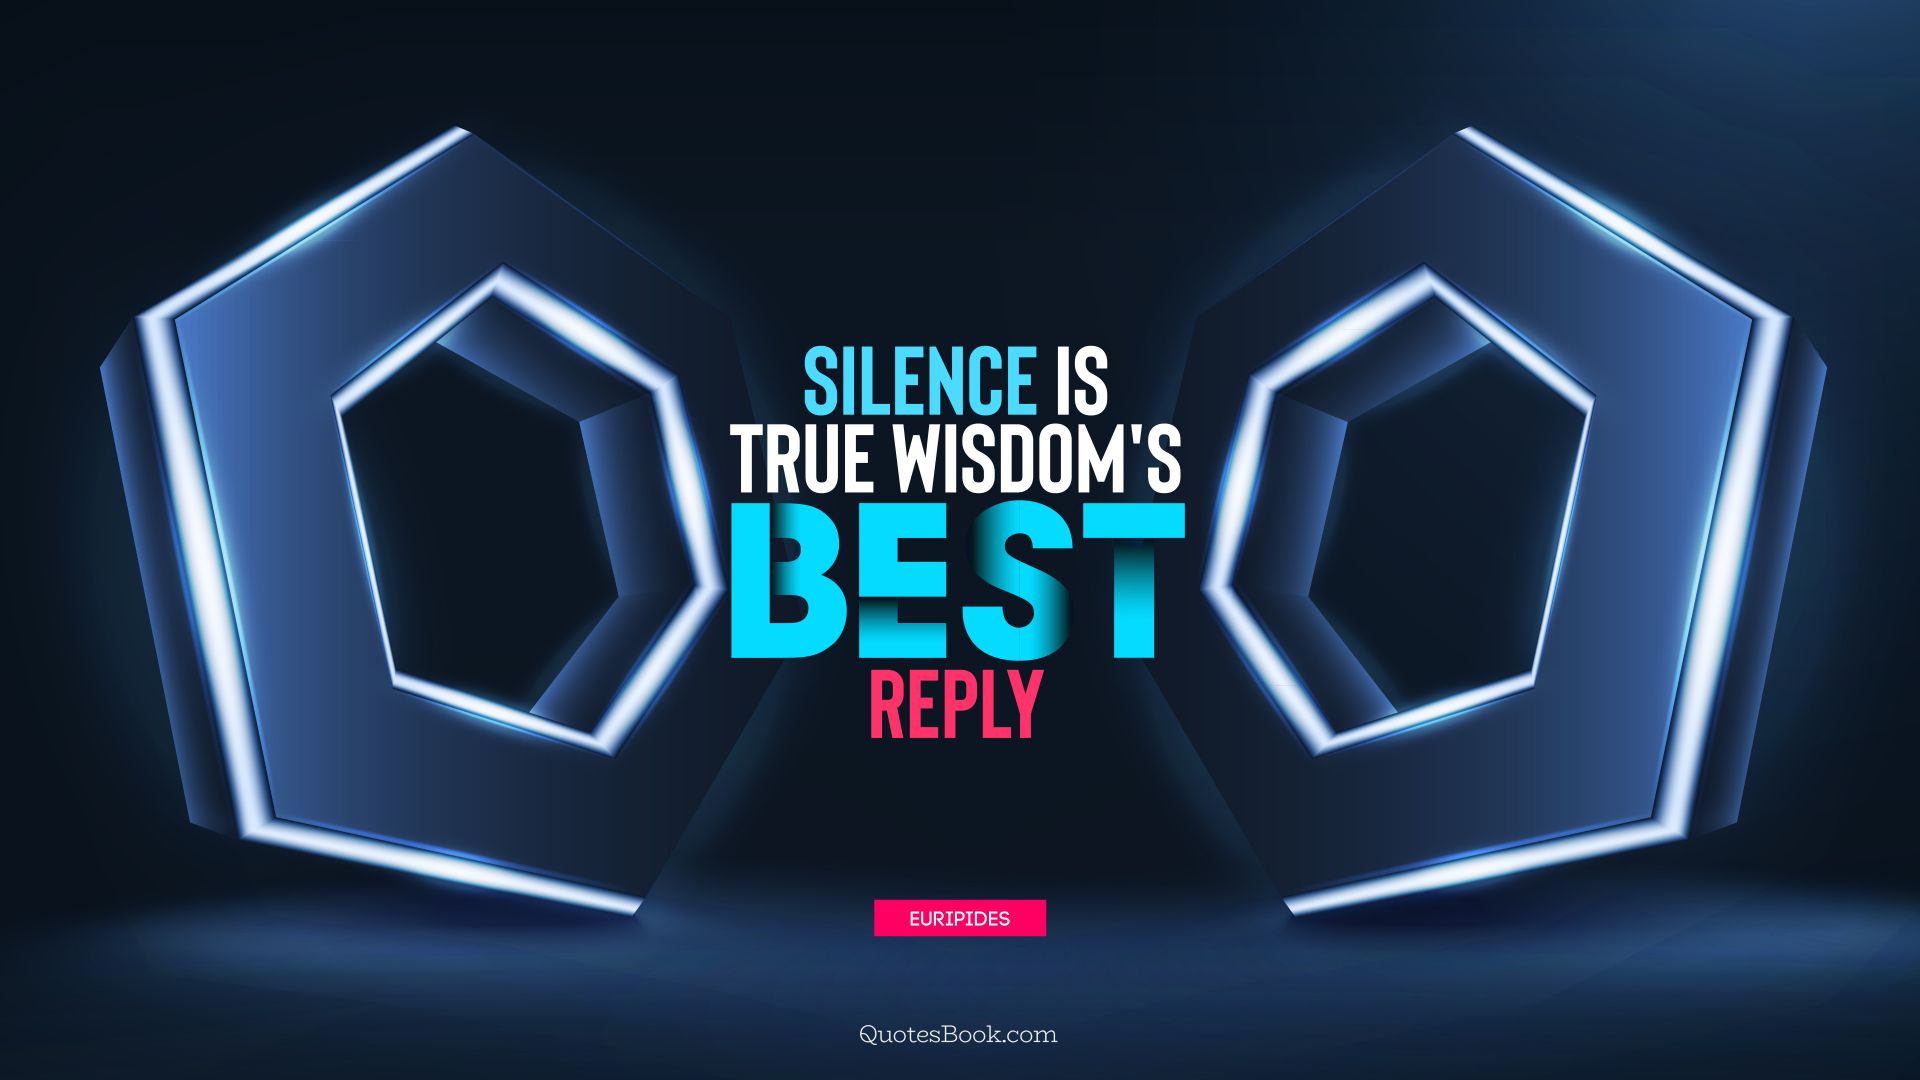 Silence is true wisdom's best reply. - Quote by Euripides